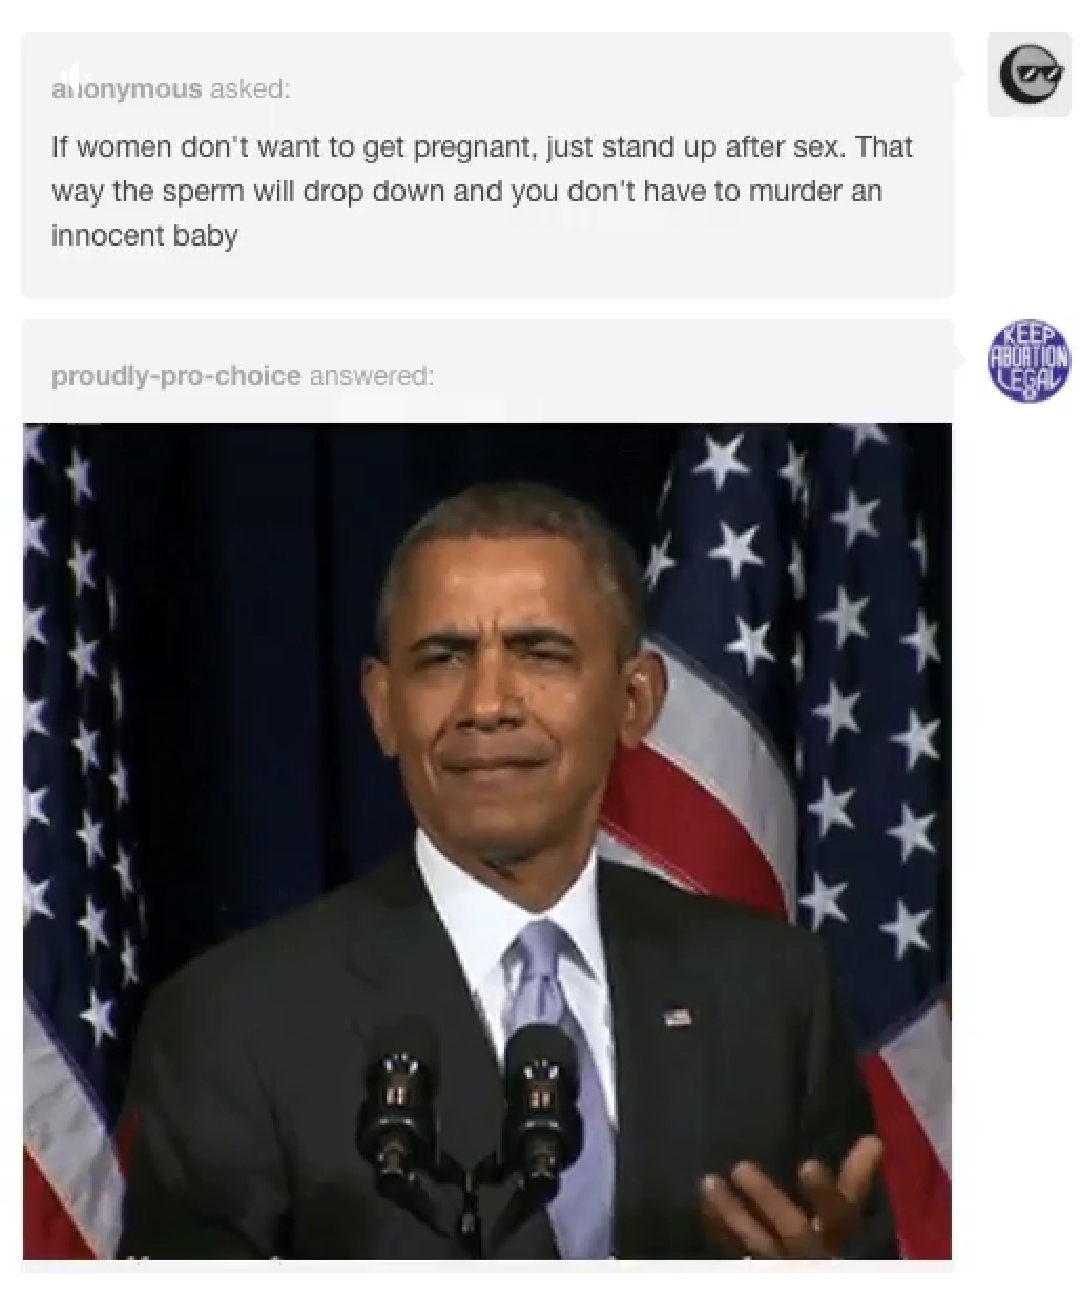 third culture kid meme - asjonymous asked If women don't want to get pregnant, just stand up after sex. That way the sperm will drop down and you don't have to murder an innocent baby proudly prochoice answered. \ \ \ hhkkk